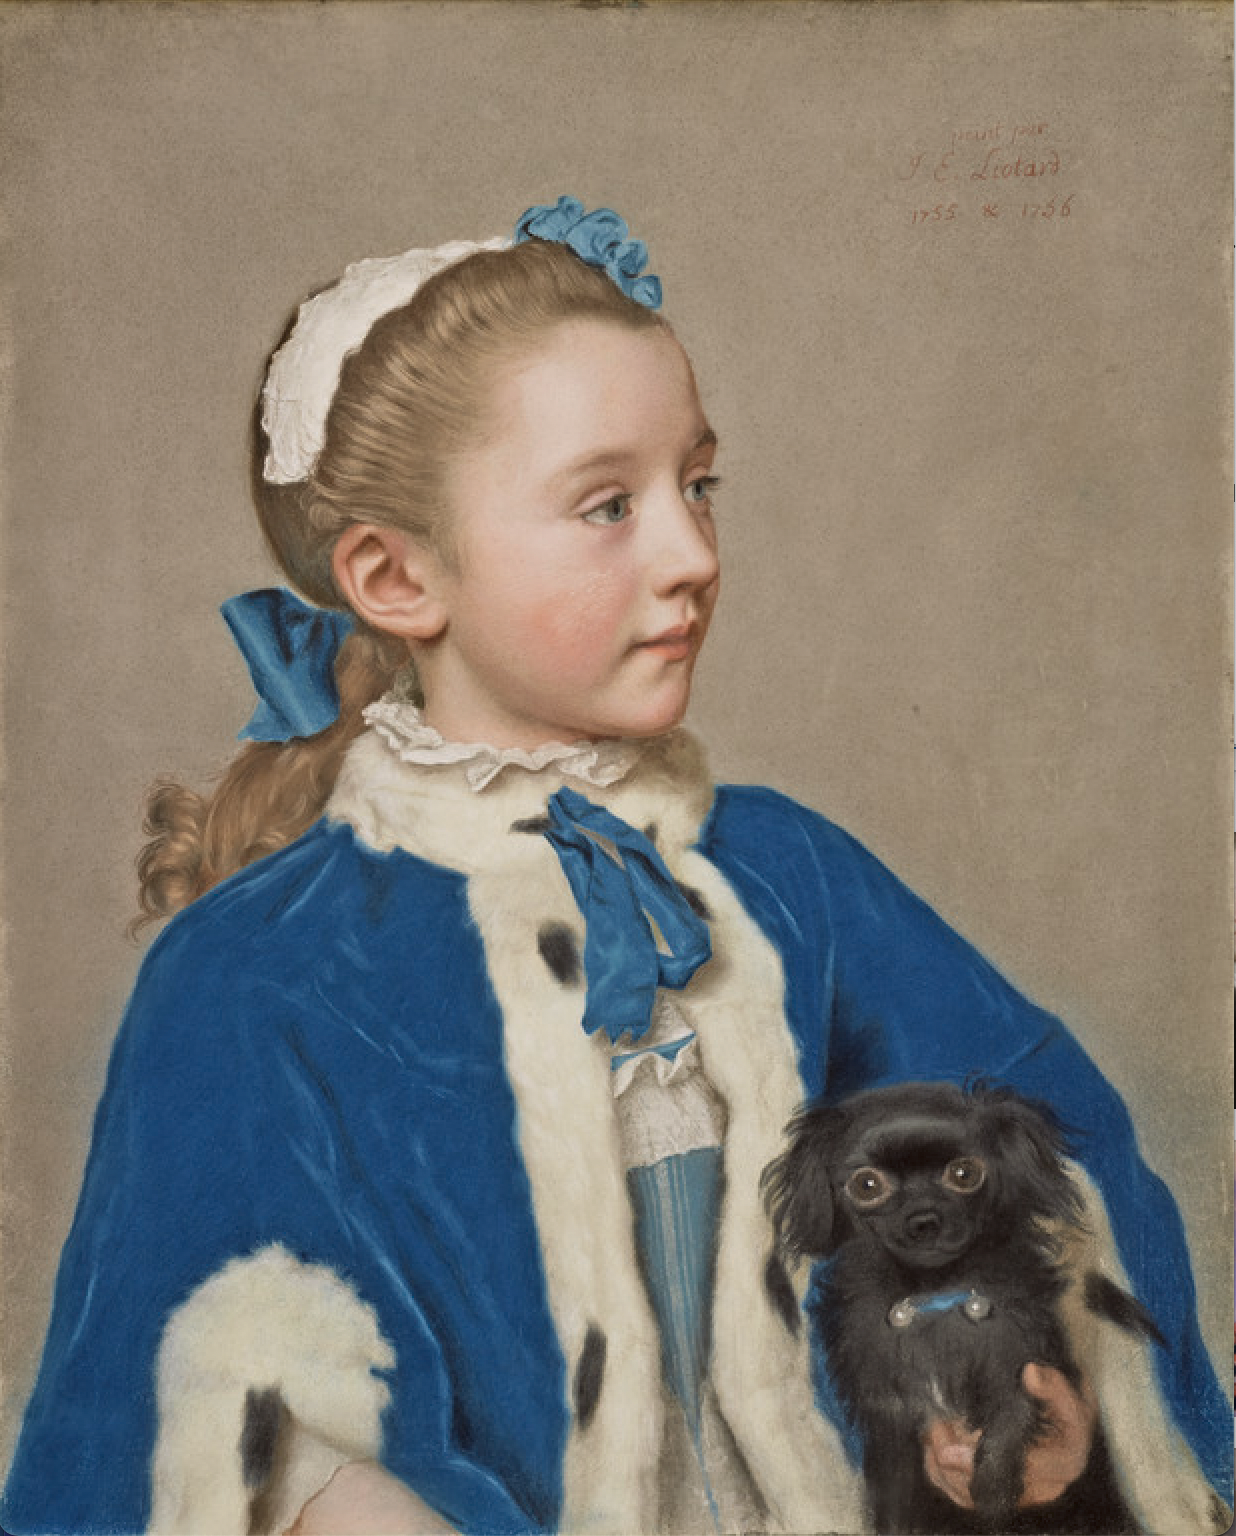 Eighteenth-century pastels: Jean-Étienne Liotard, Portrait of Maria Frederike van Reede-Athlone at Seven Years of Age, 1755-6, pastel on vellum, 54.9 x 44.8 cm (21 5/8 x 17 5/8 in), The J.Paul Getty Museum, Los Angeles, California, USA